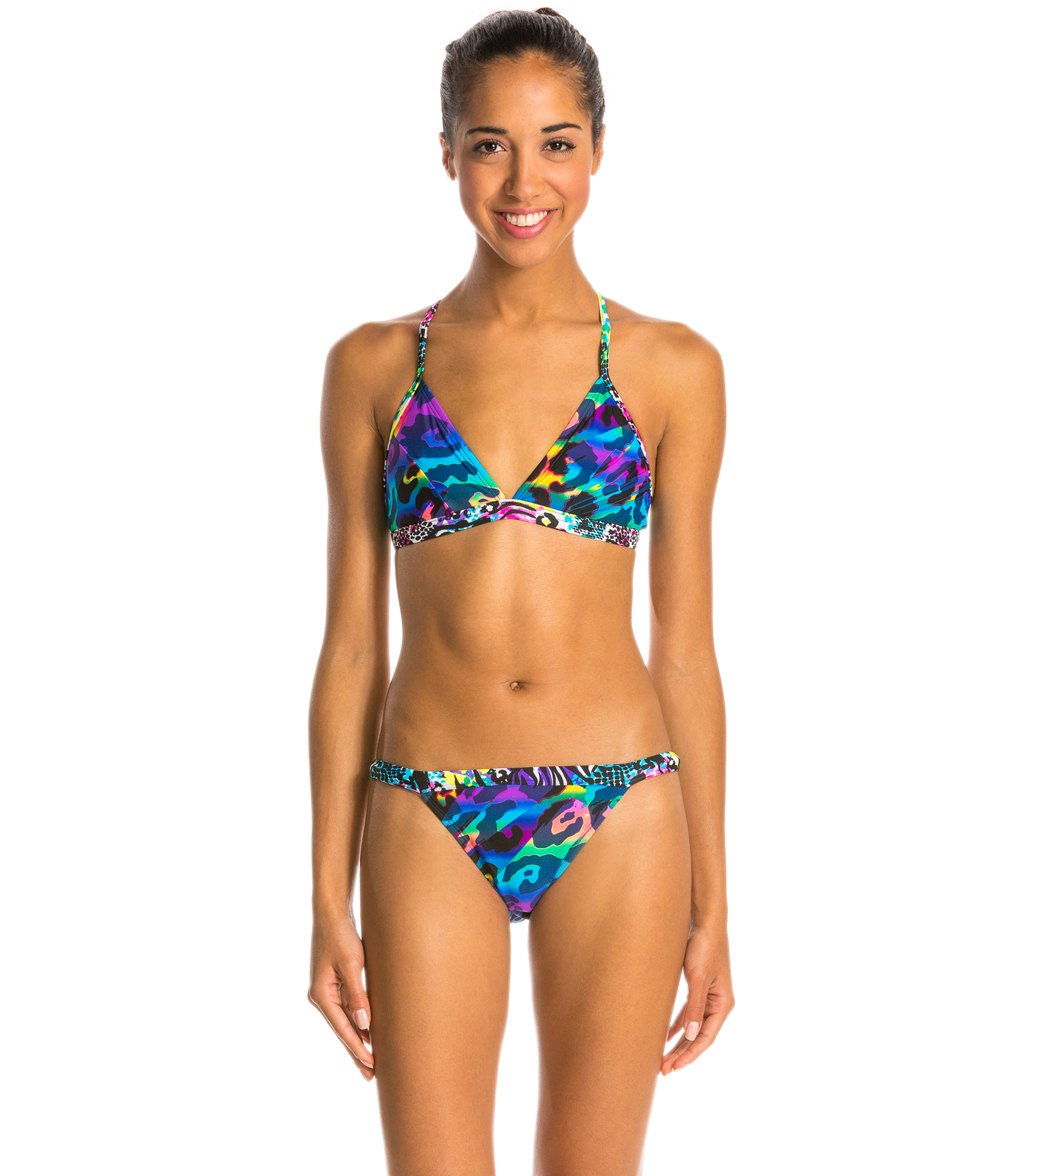 Illusions Activewear Camo Glow Banded Two Piece Swimsuit - Multi 24 Nylon/Lycra® - Swimoutlet.com